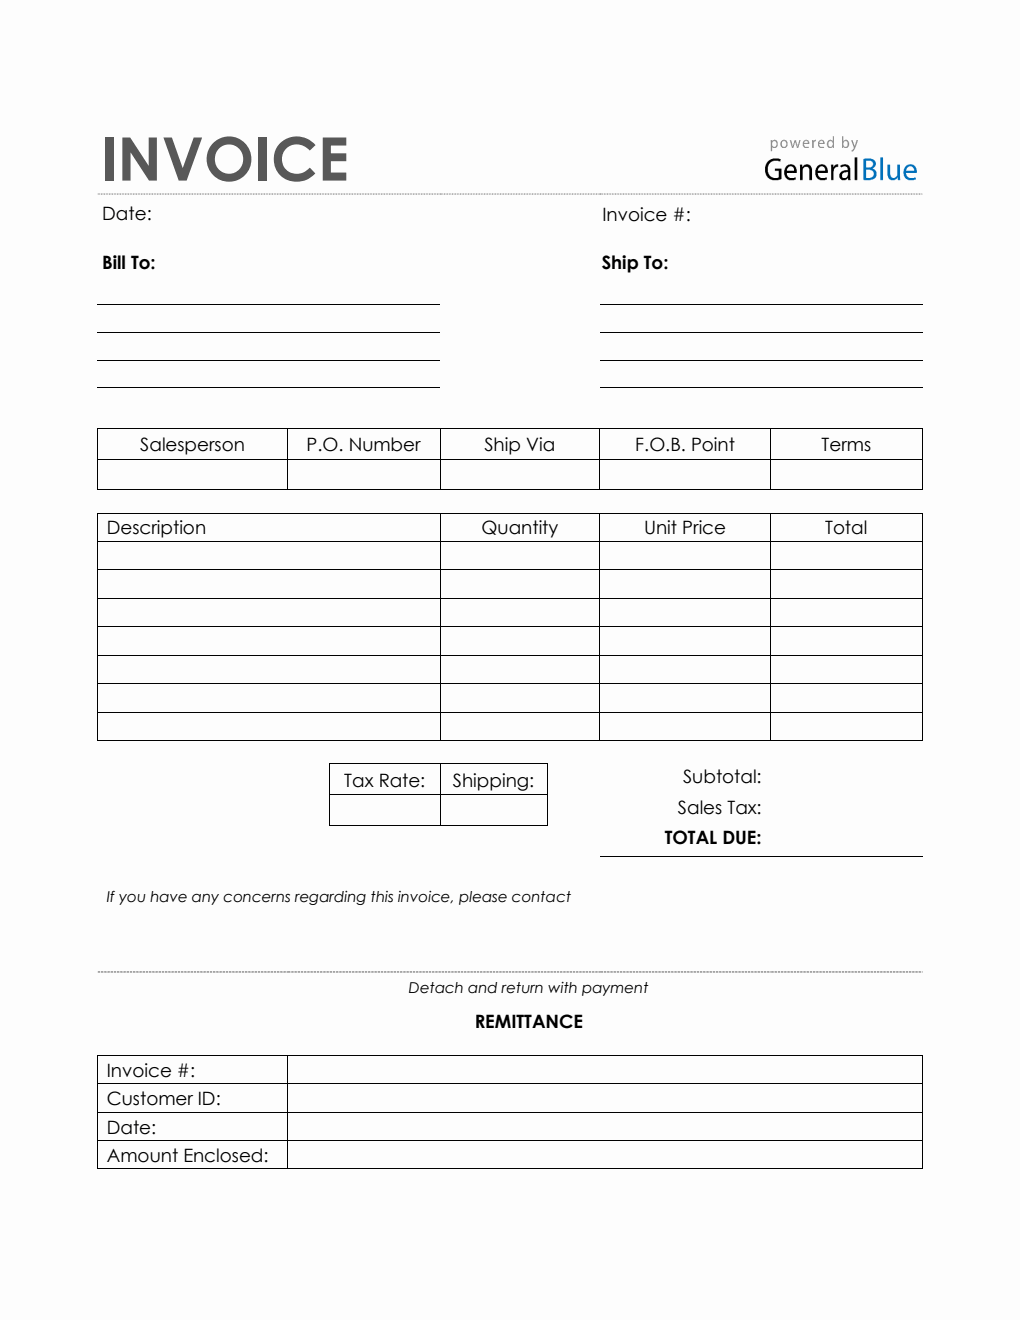 Sales Invoice with Remittance Slip in PDF (Simple)